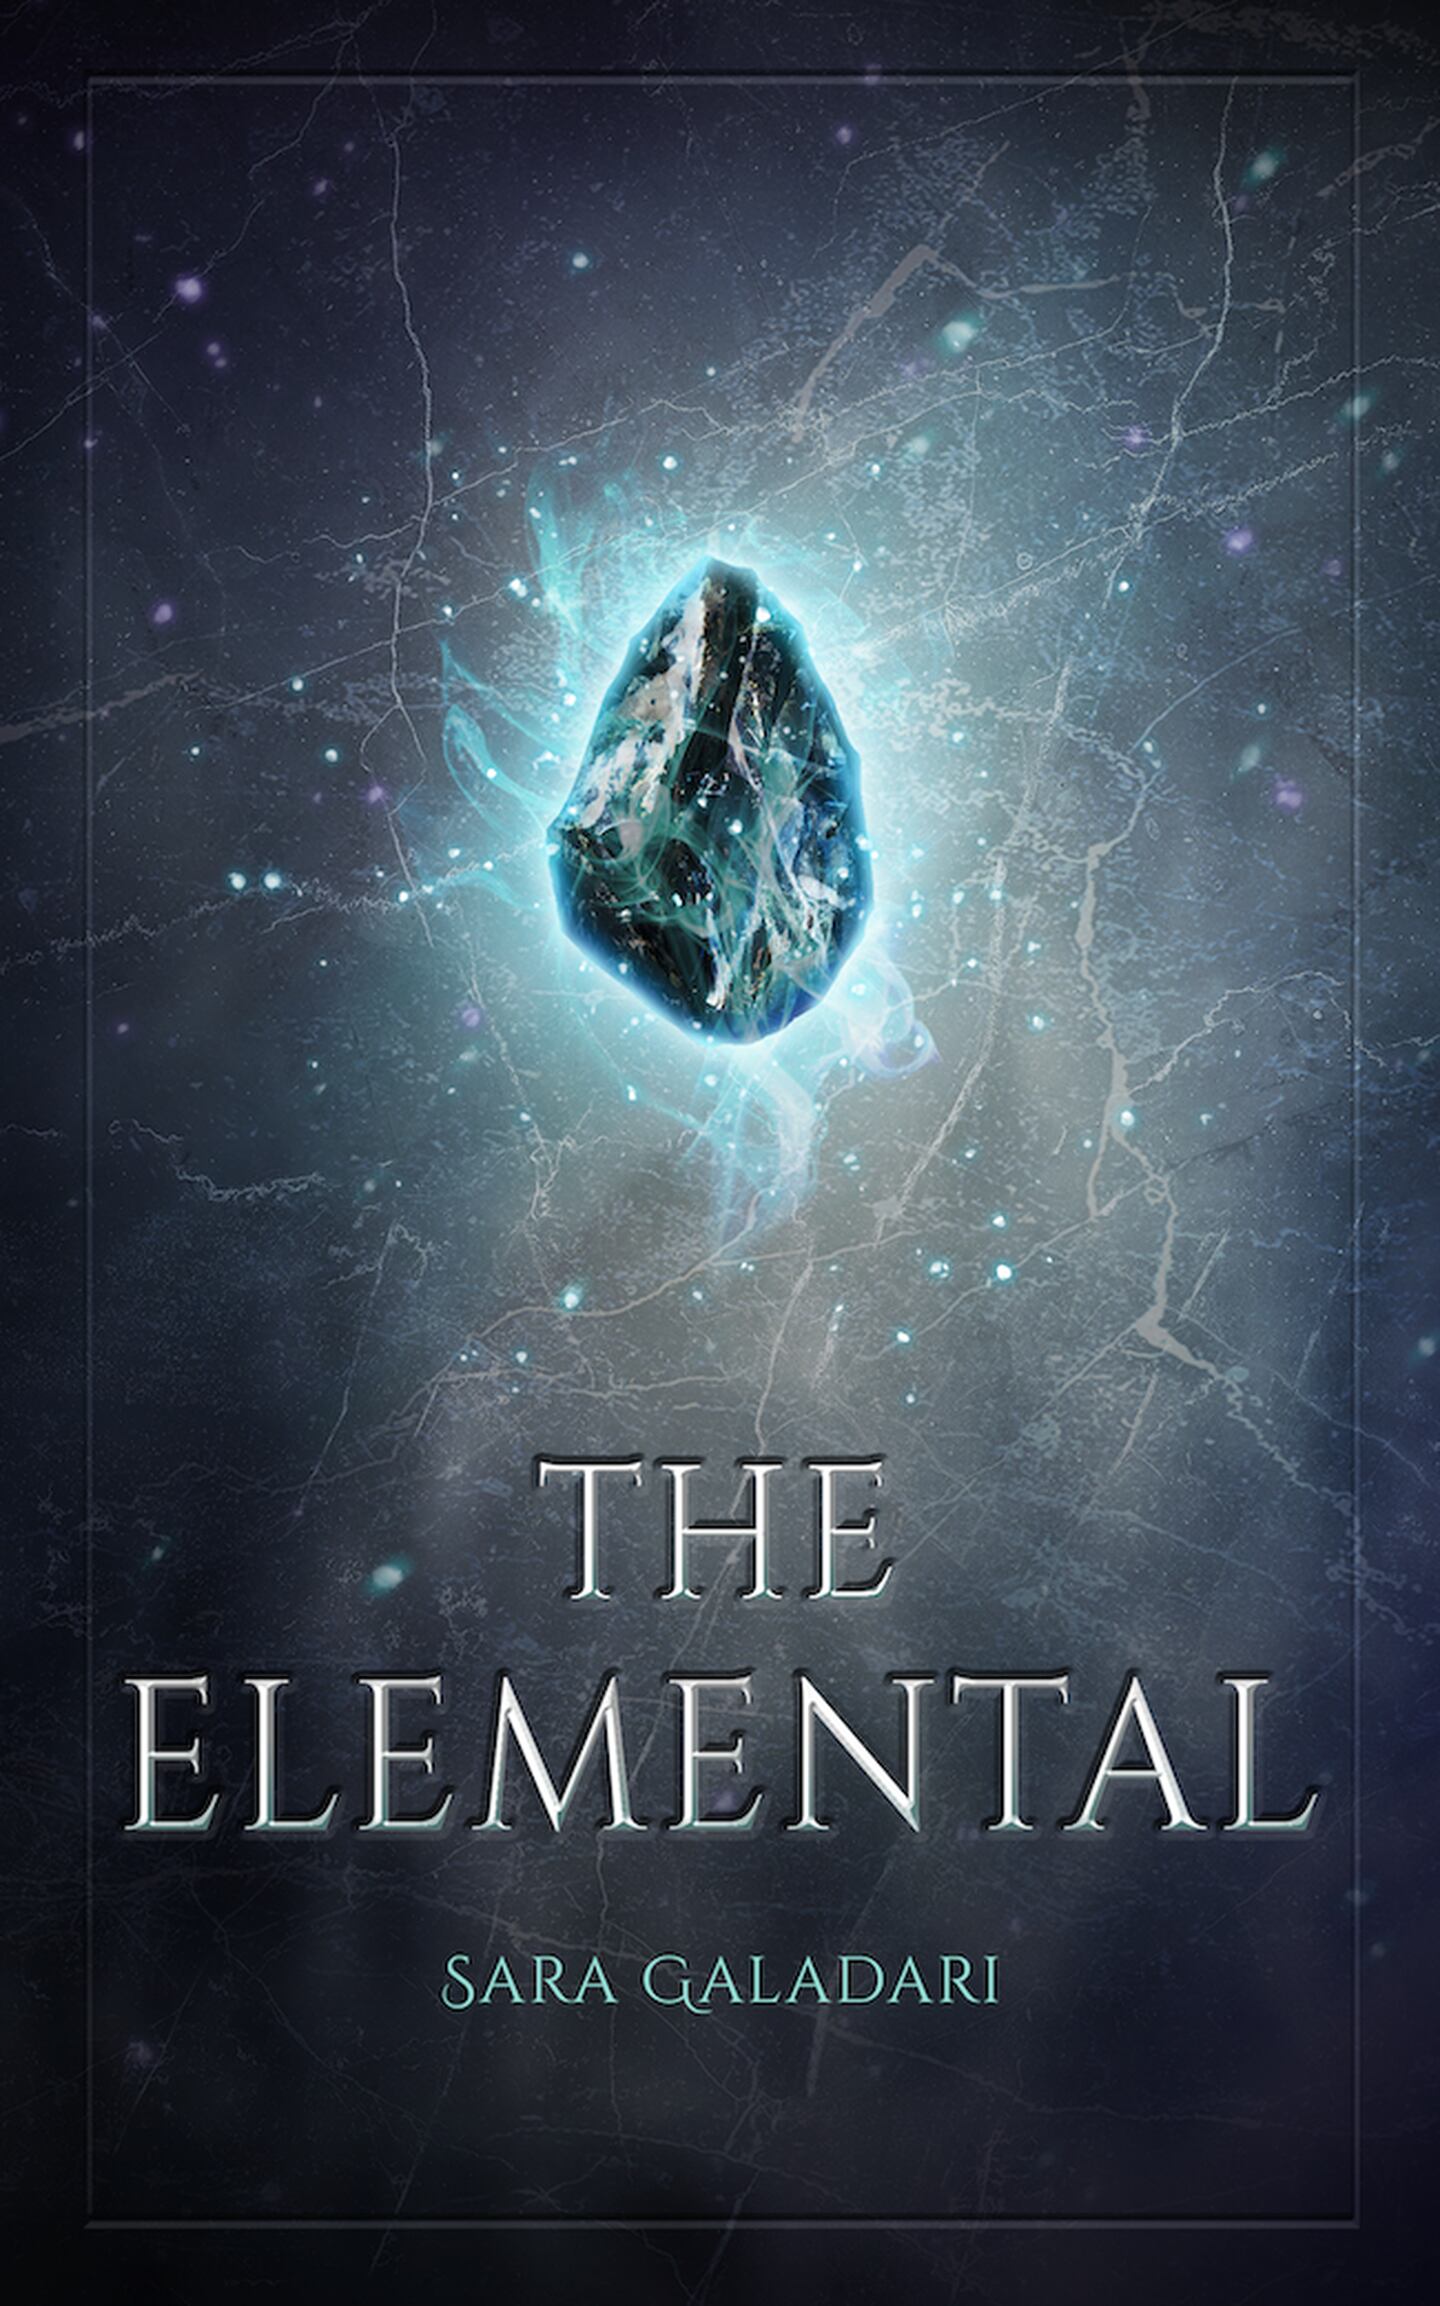 'The Elemental' is a marked departure from Galadari's previous novels.